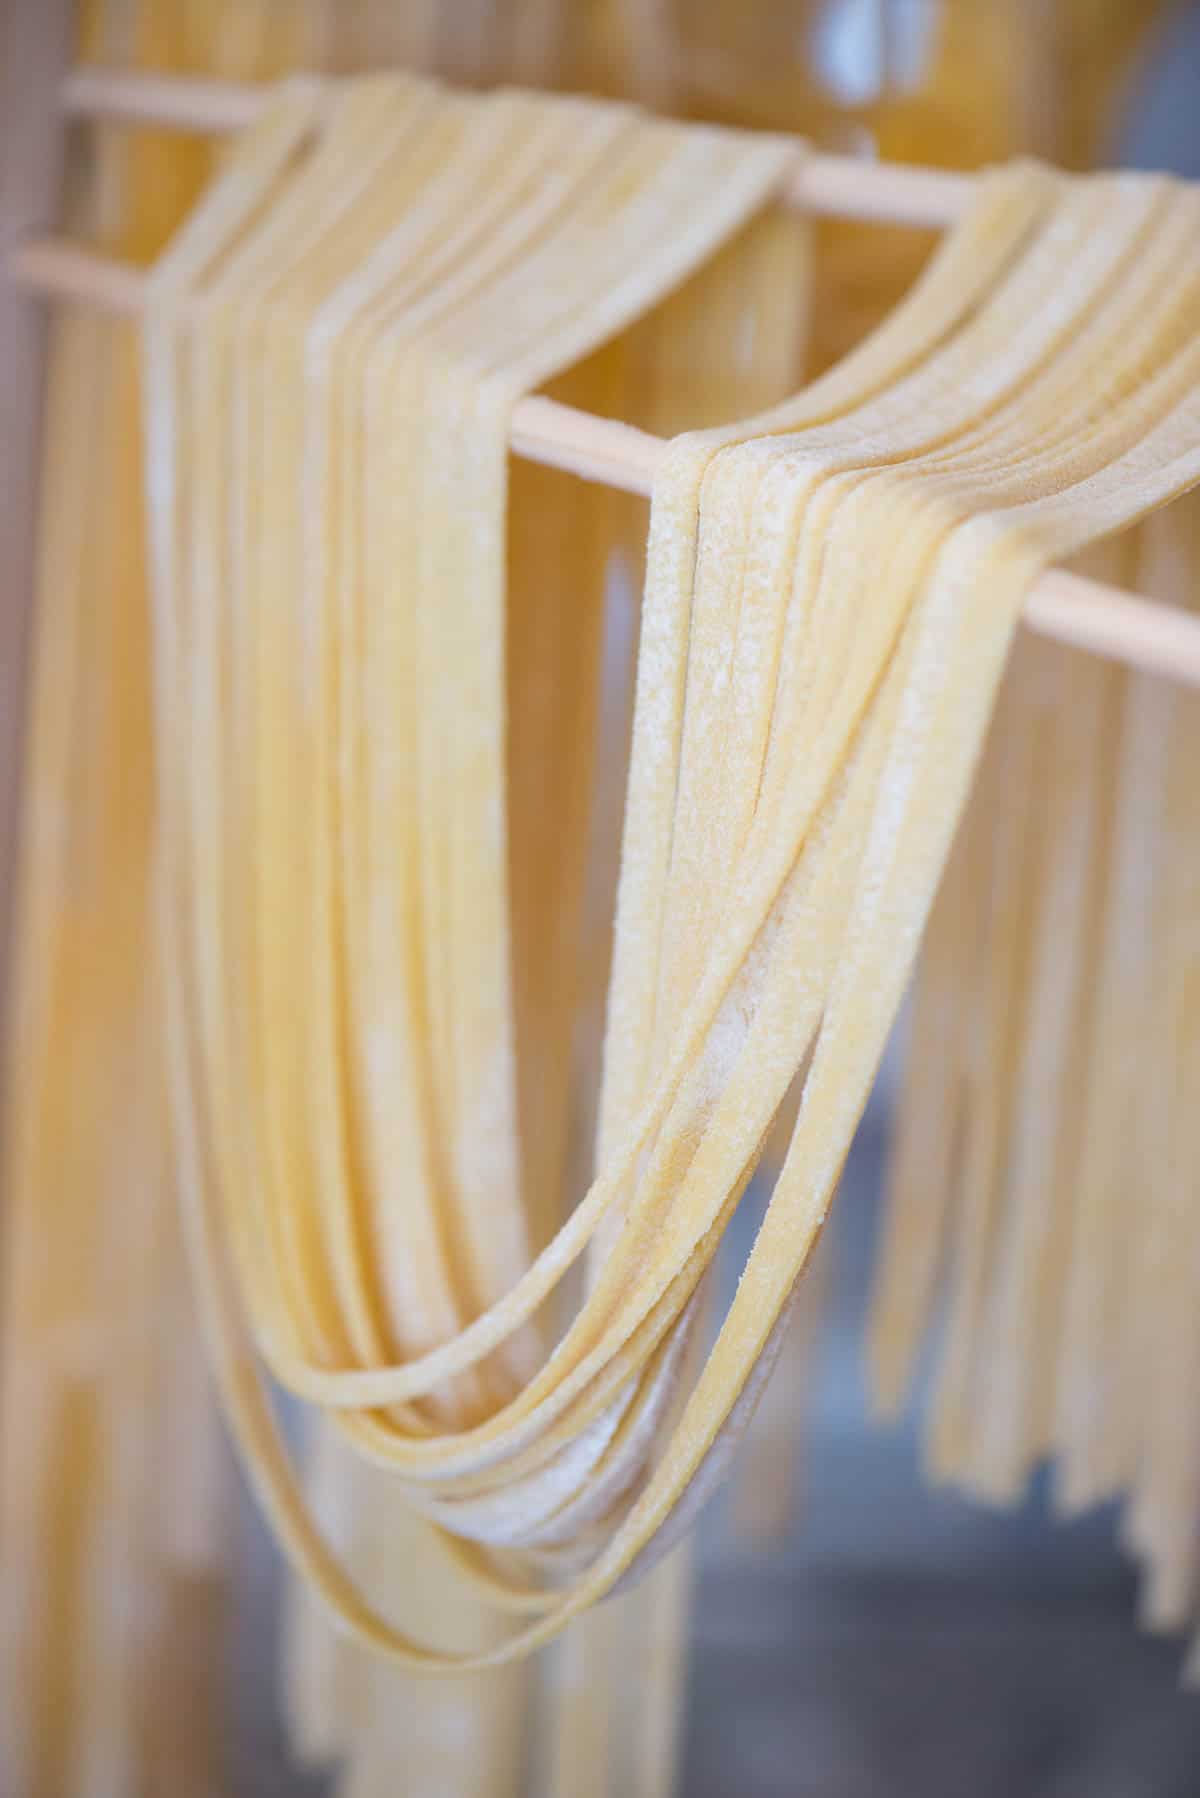 long homemade noodles on wooden drying rack.